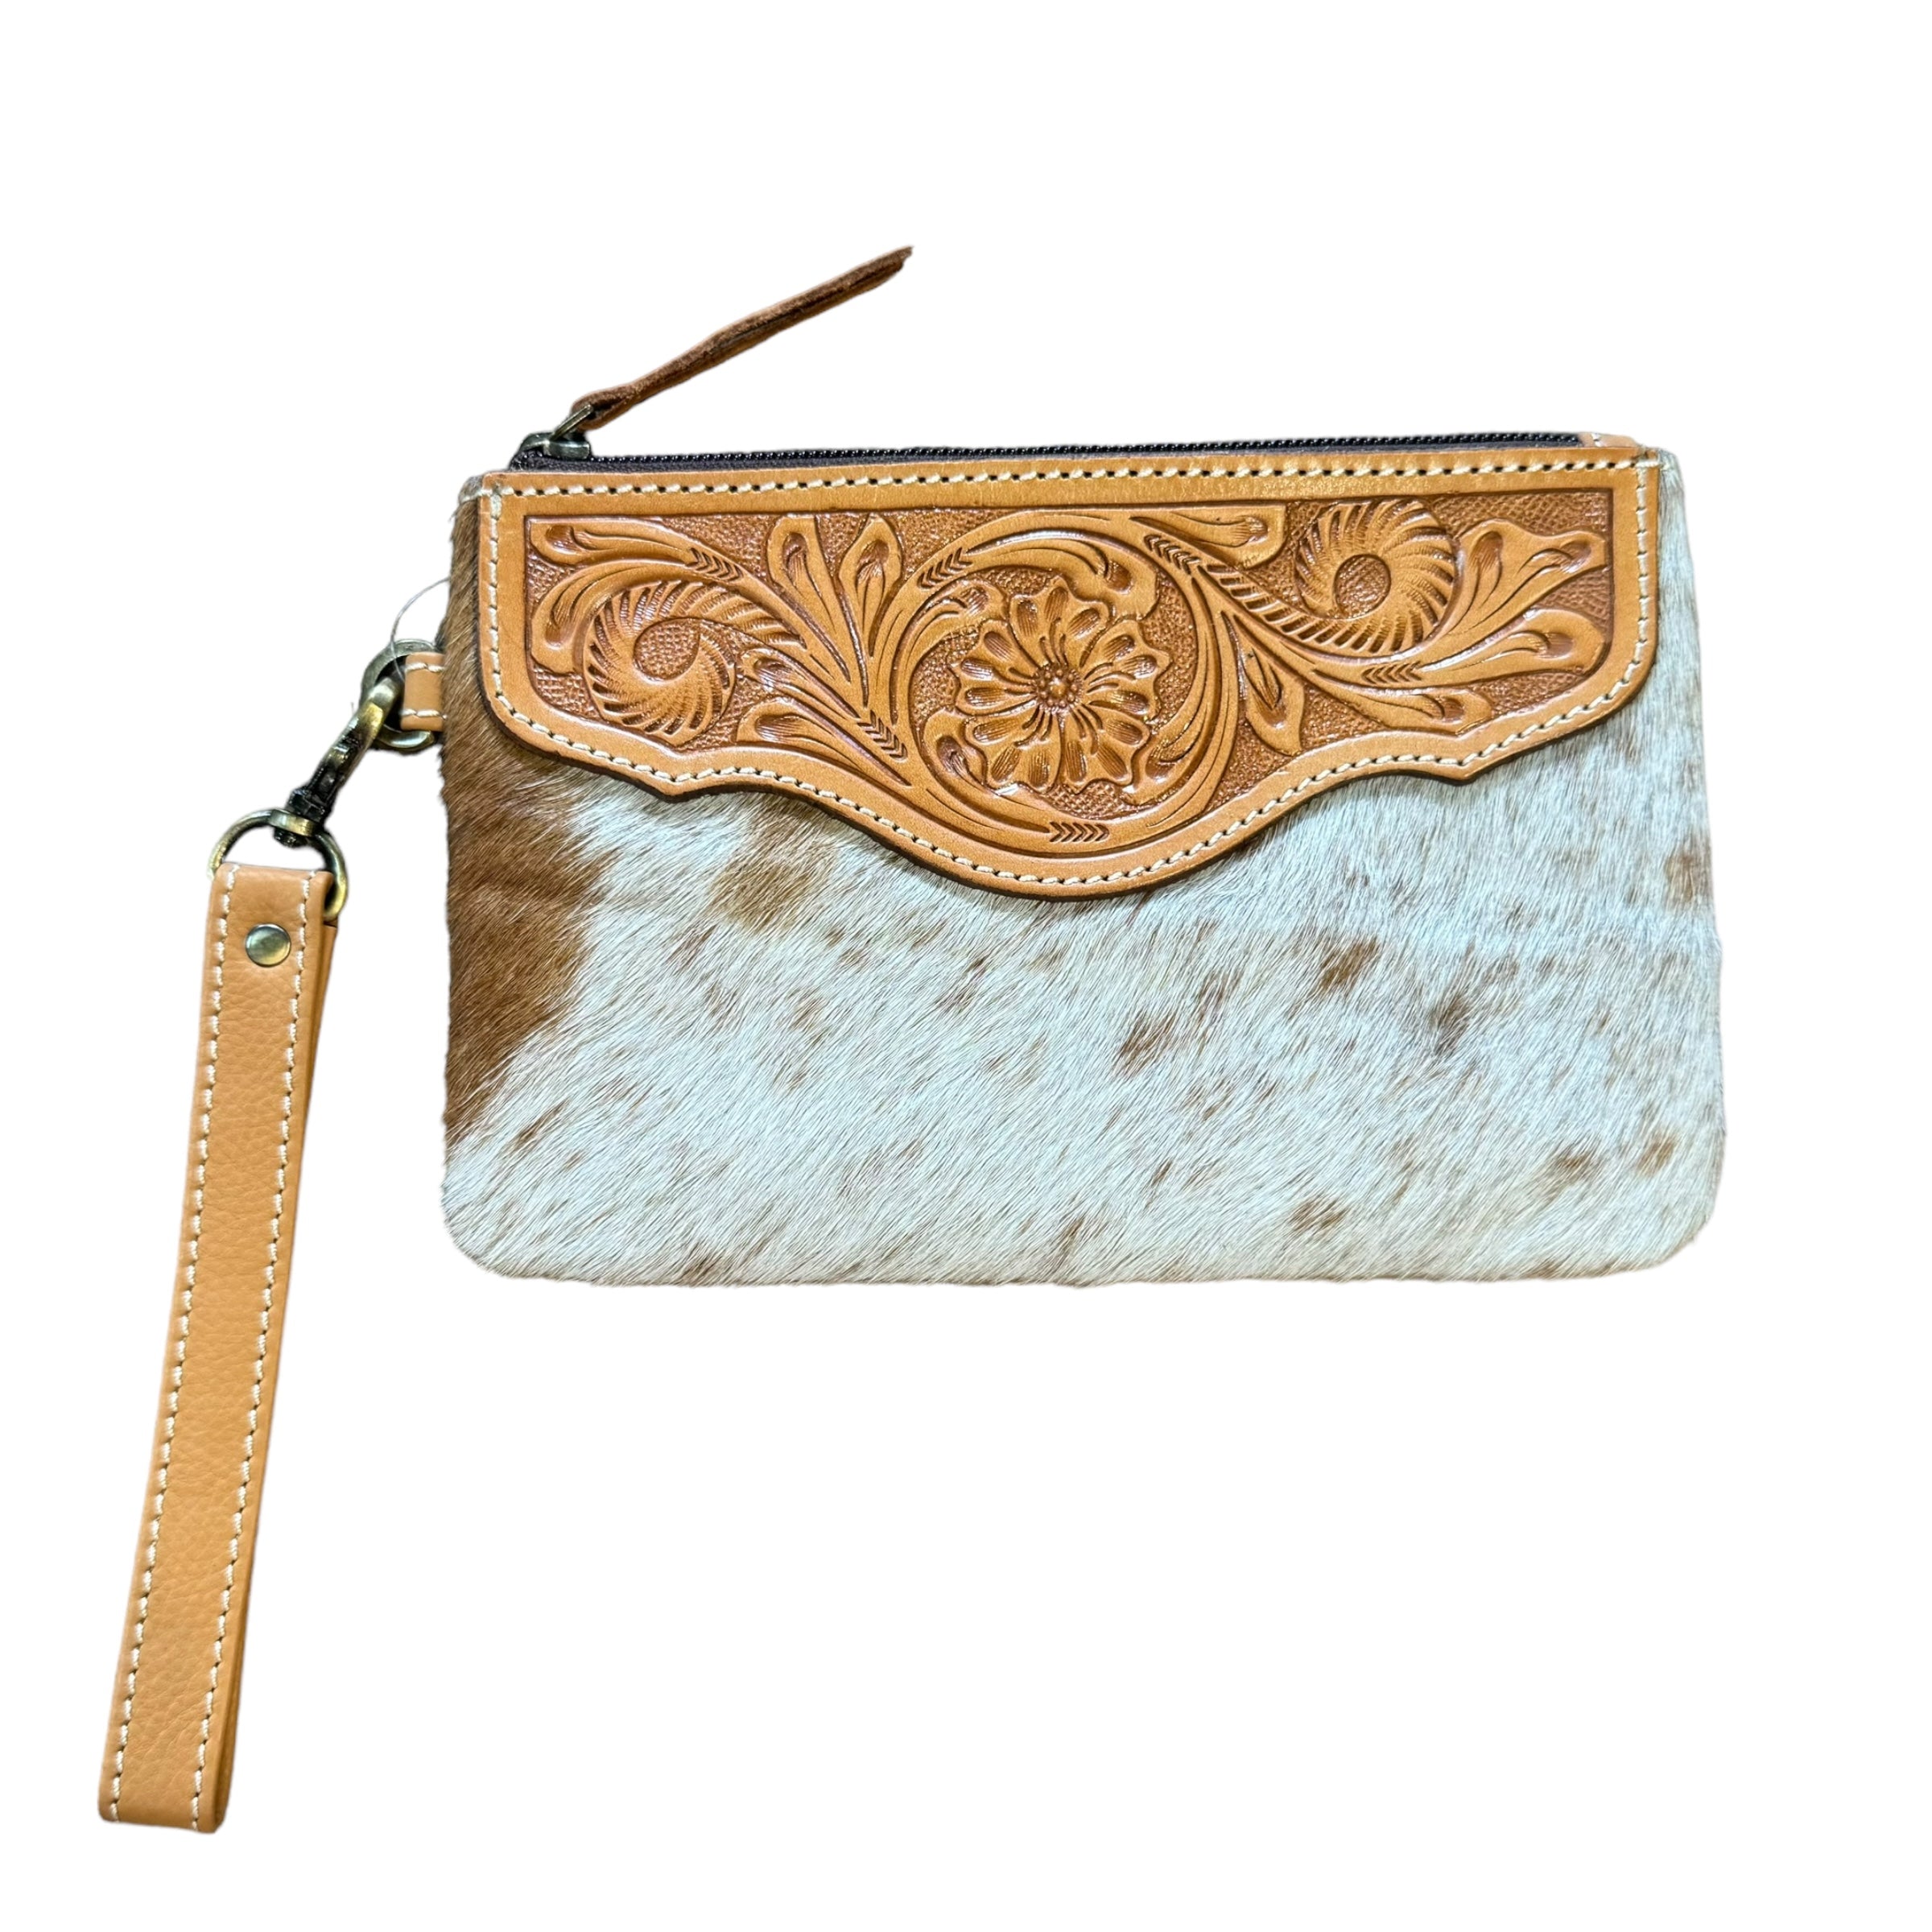 ‘Delungra' Tooled Leather Cowhide Clutch - Tan